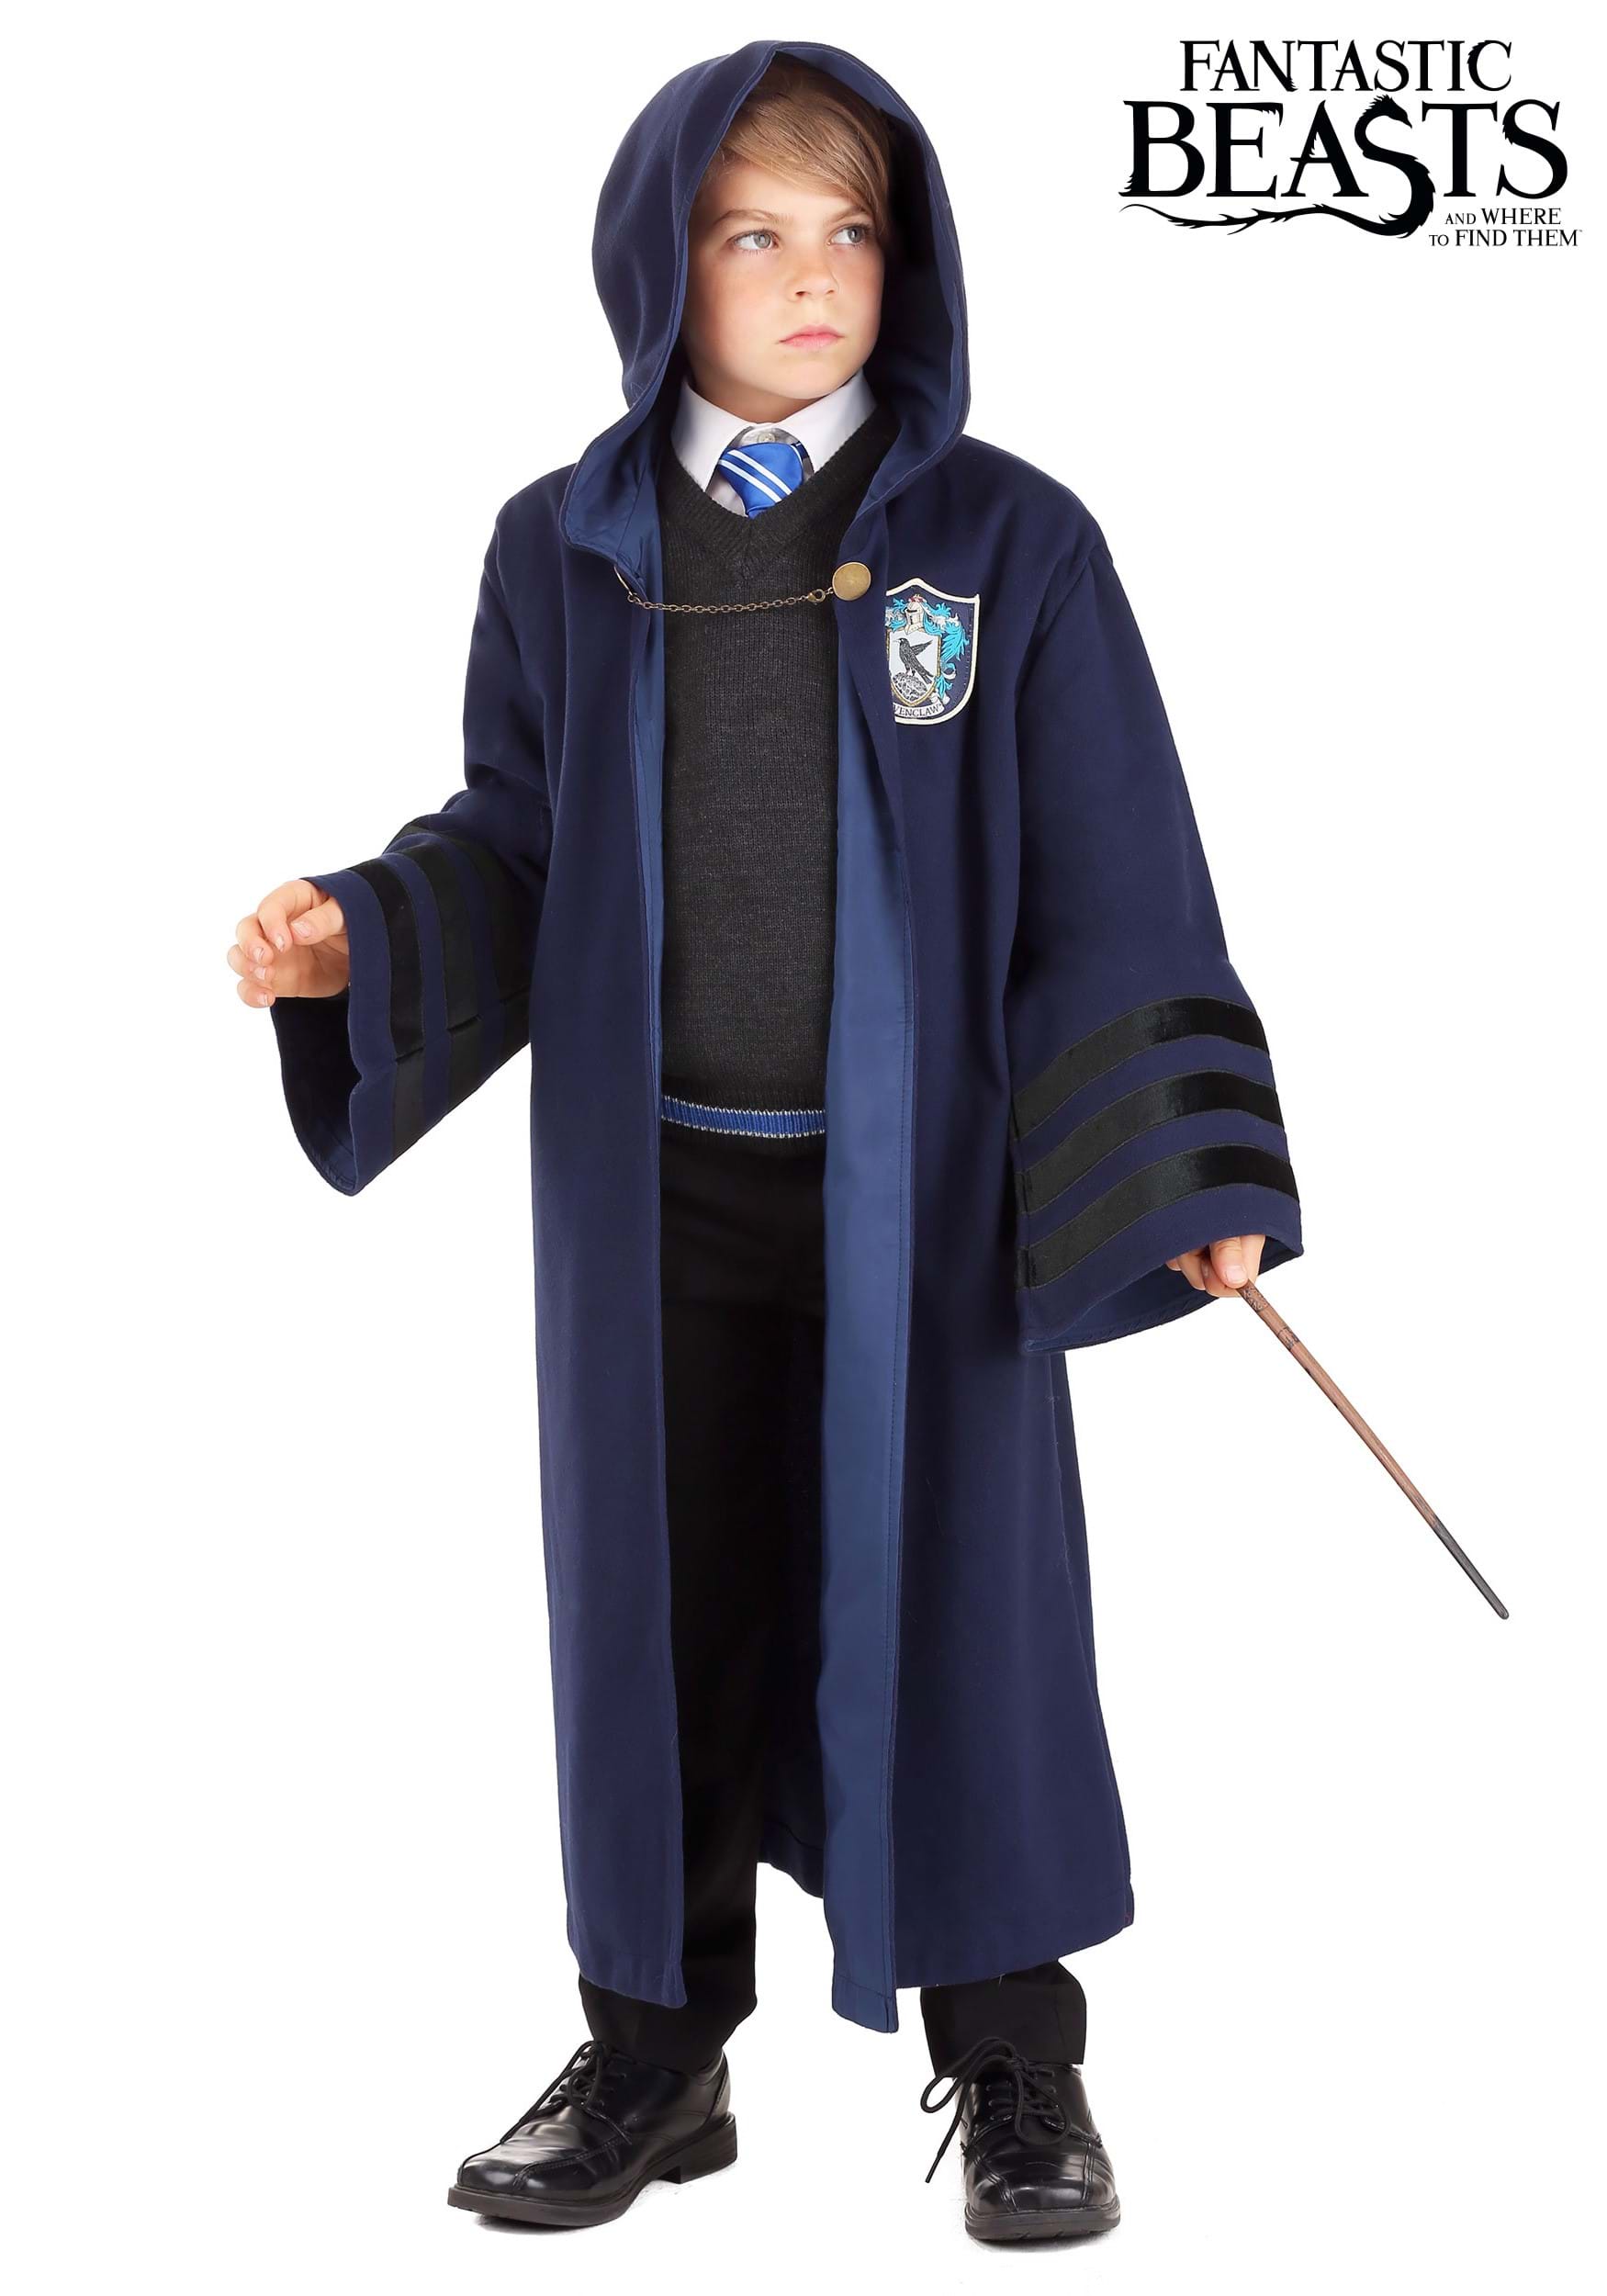 Spirit Halloween Harry Potter Kids Hogwarts Robe | Officially licensed |  Harry Potter Costume | Wizard Outfit